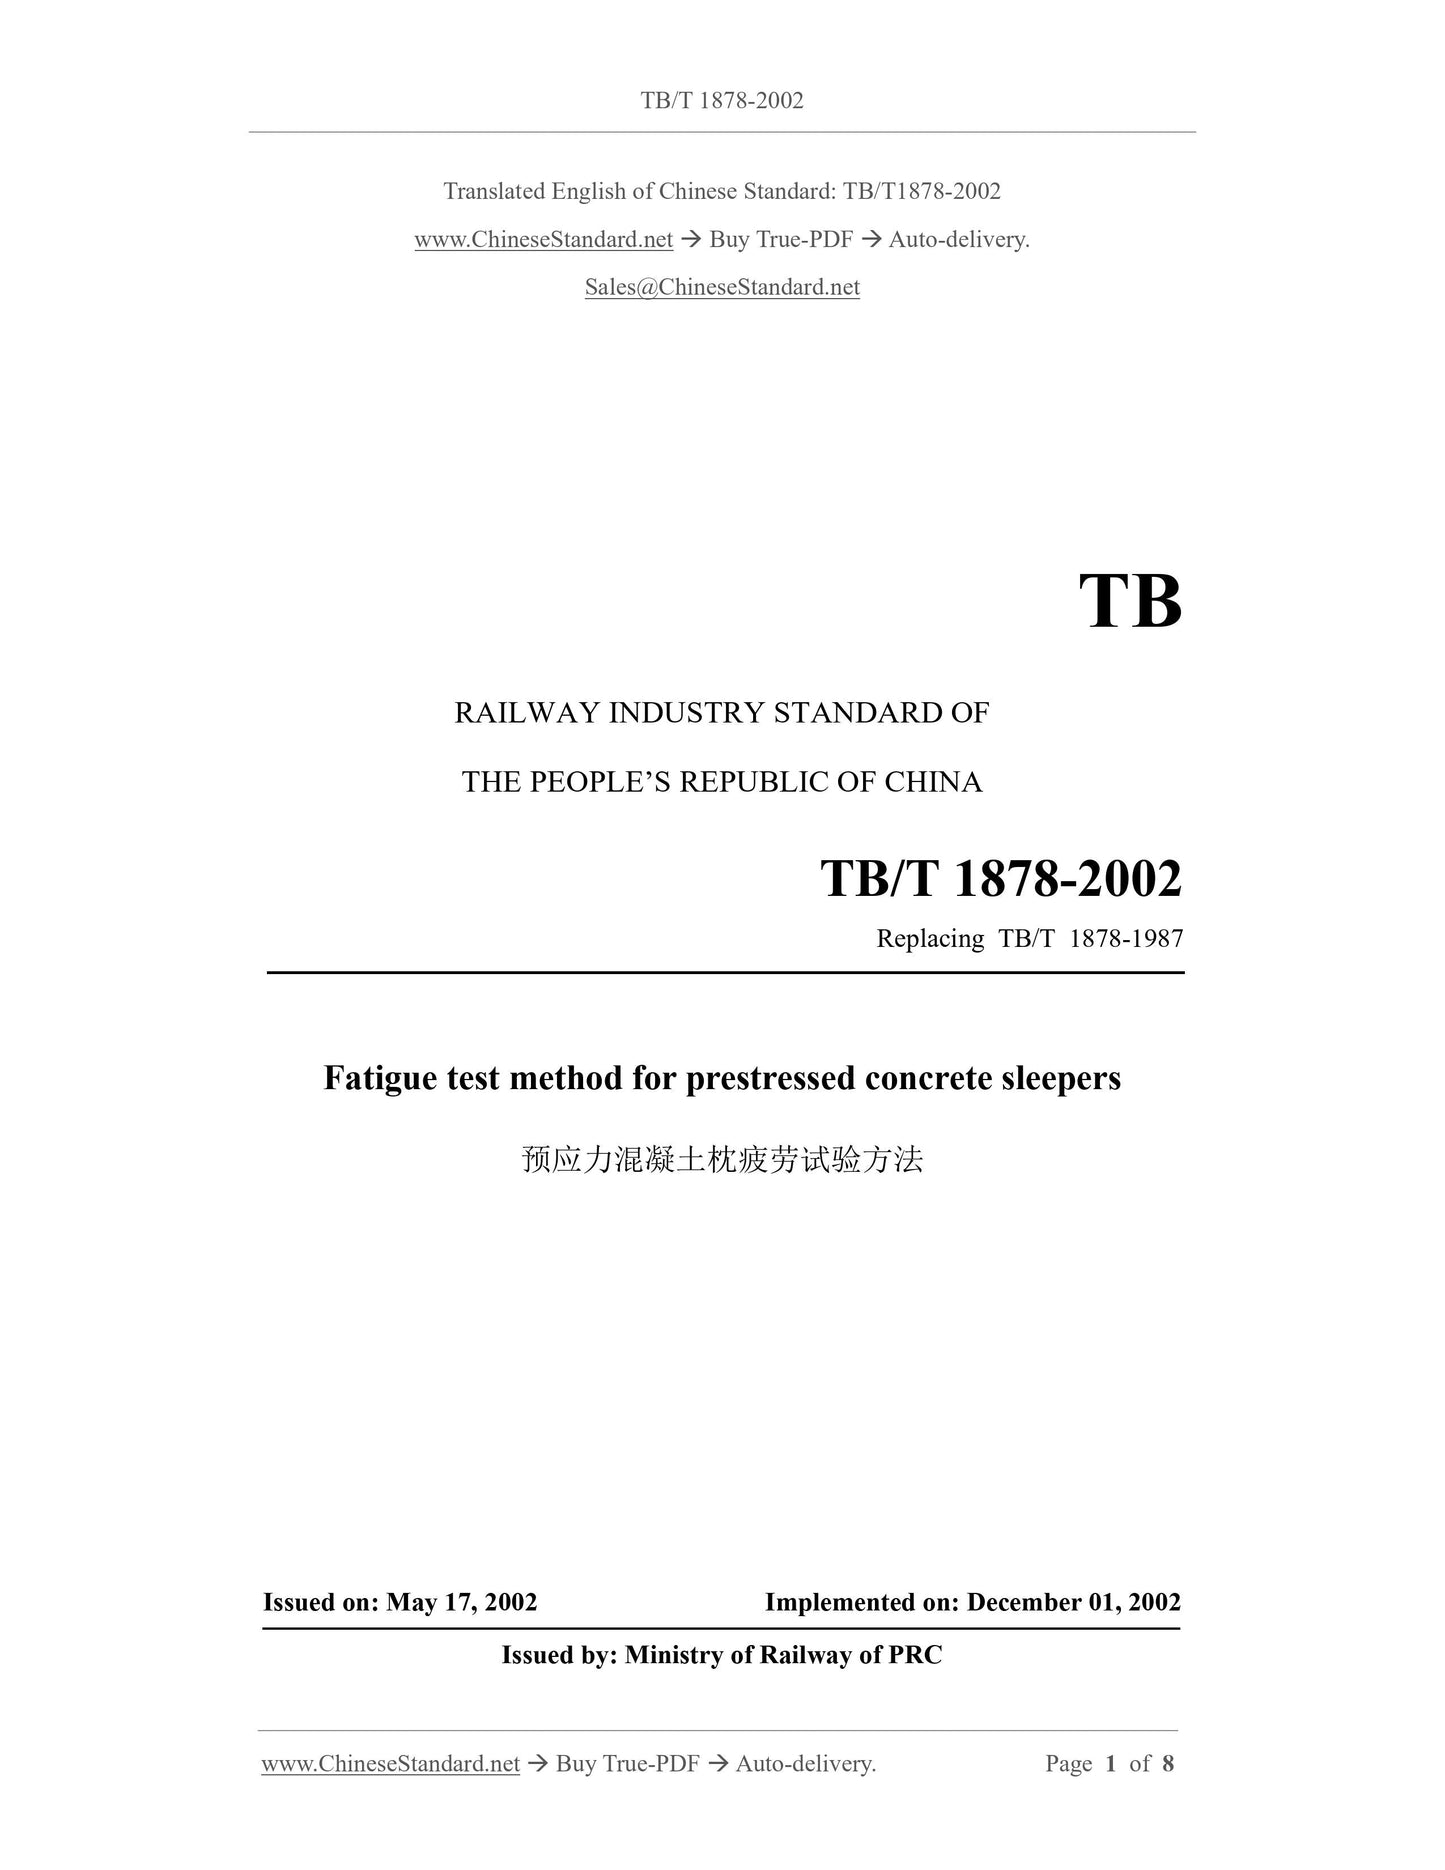 TB/T 1878-2002 Page 1